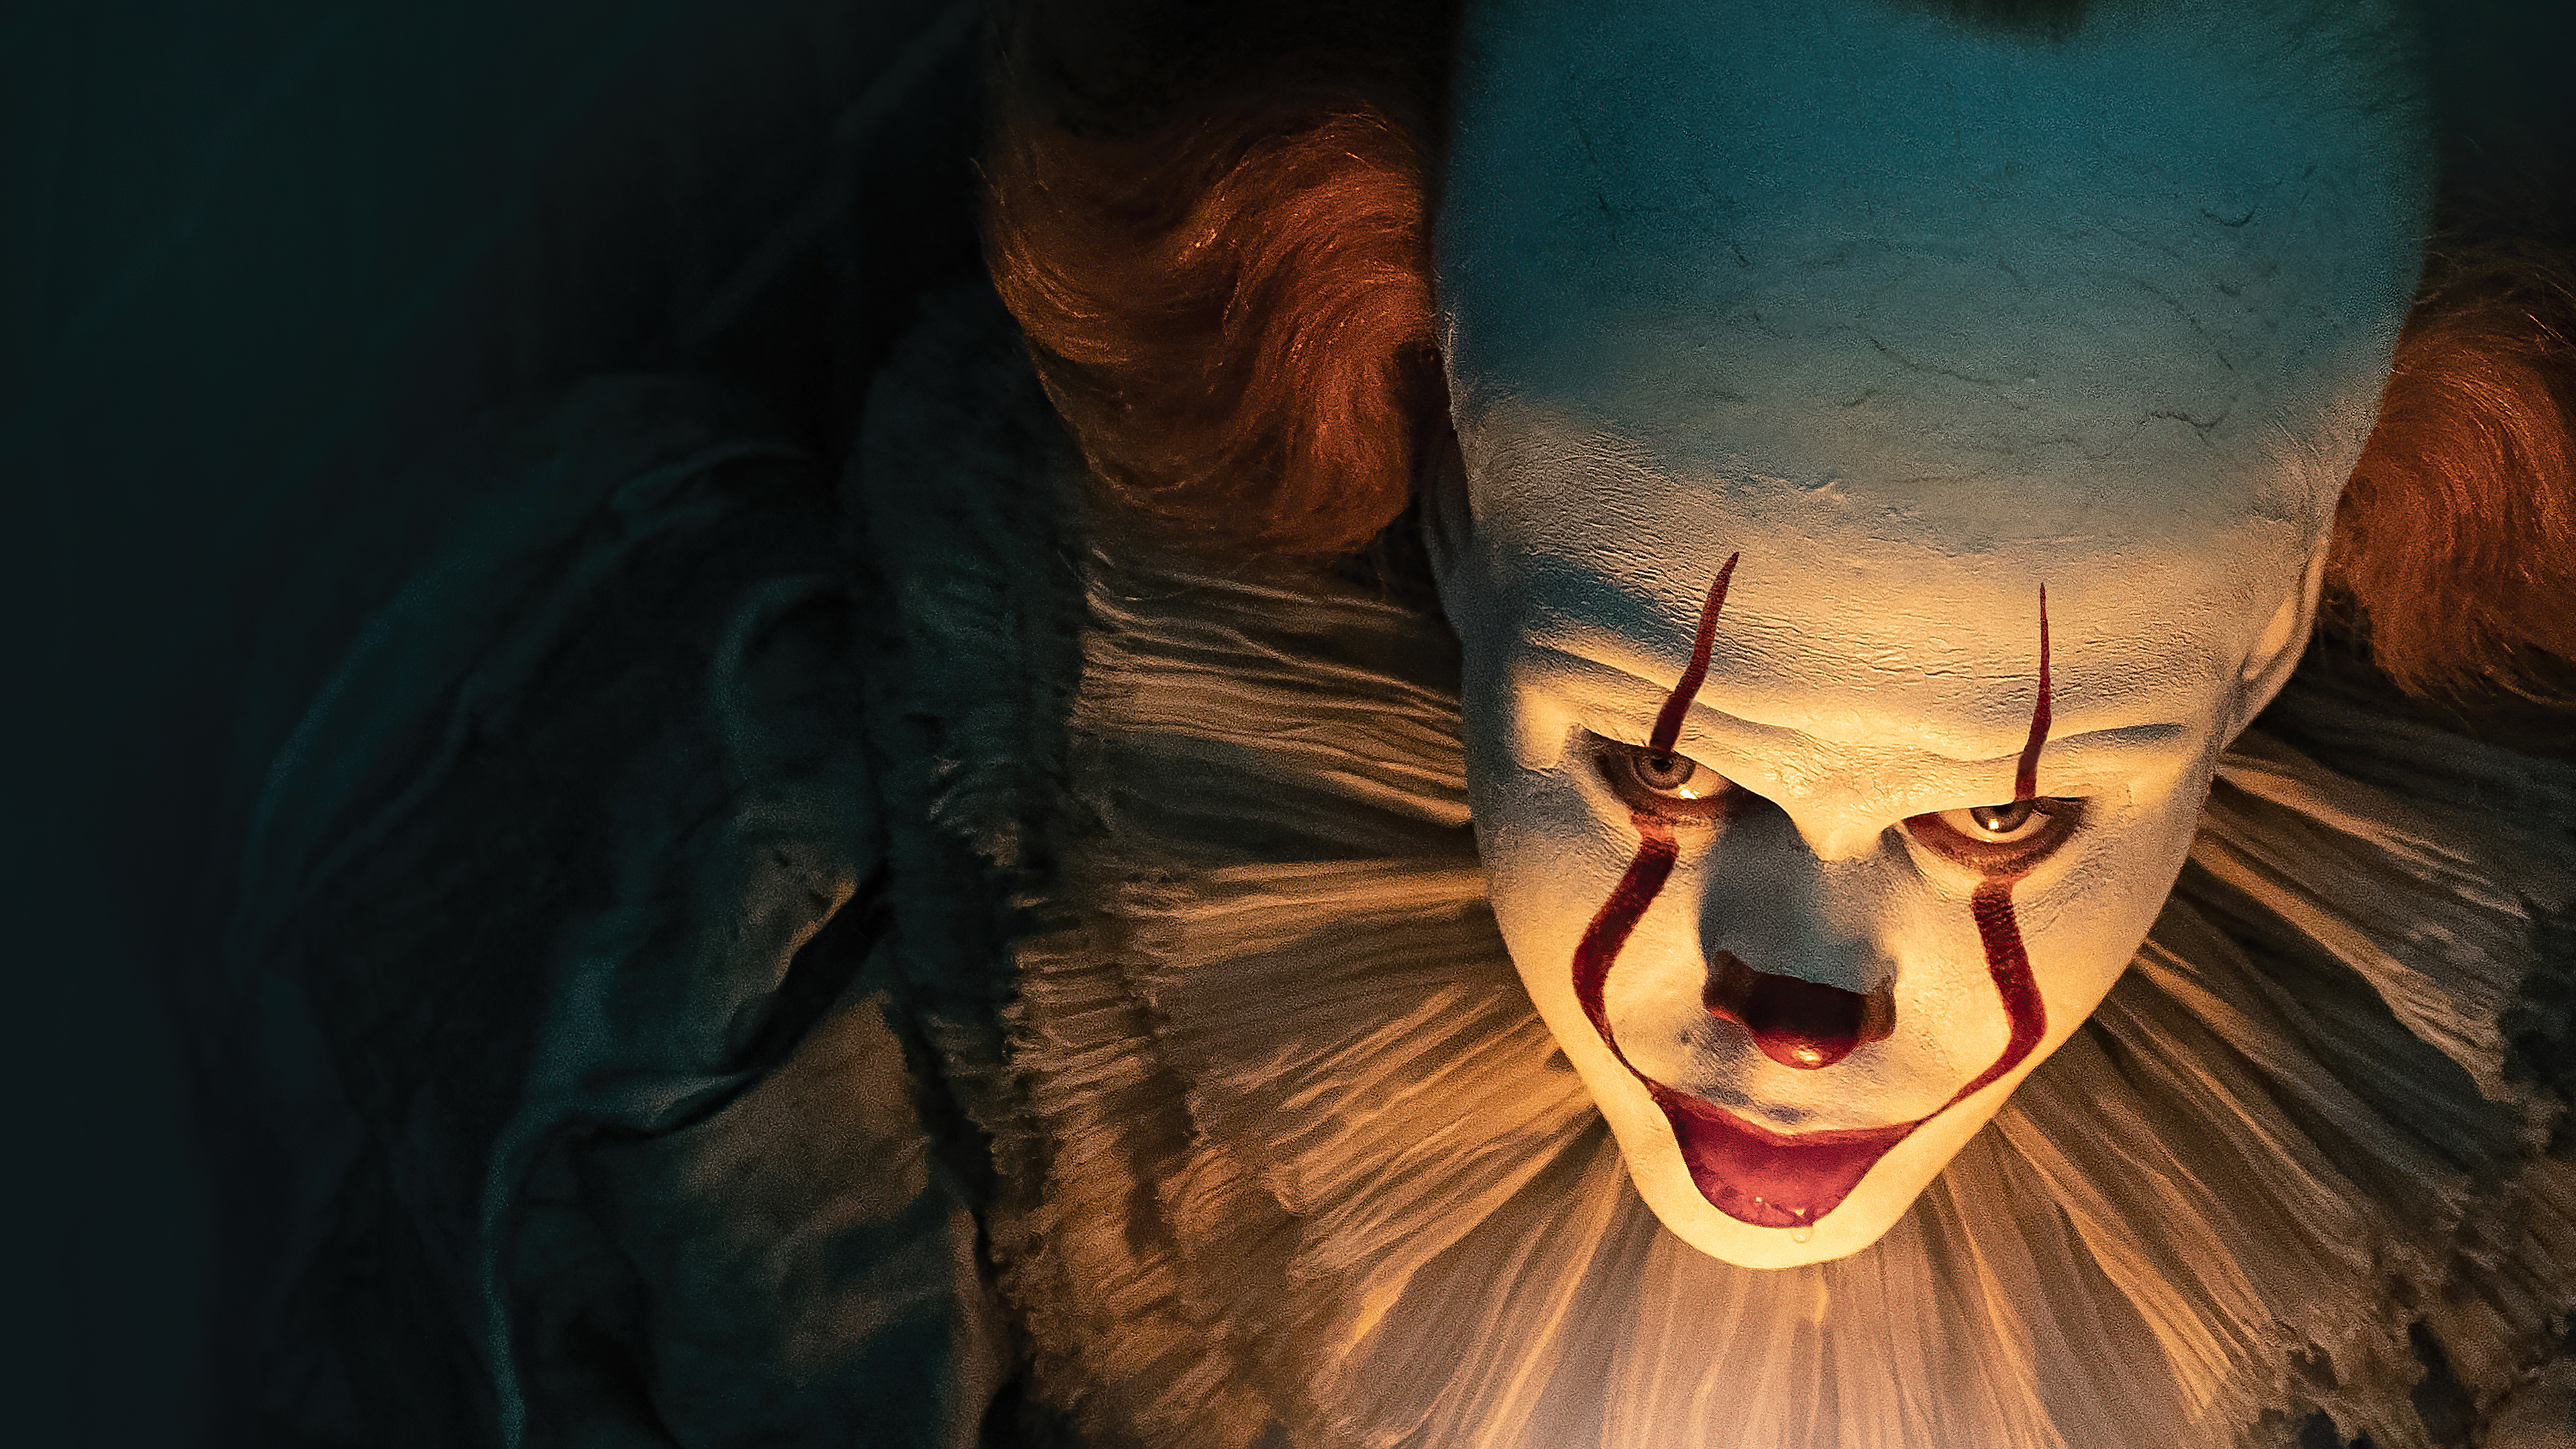 Pennywise 2019 pennywise wallpapers movies wallpapers hdwallpapers  artwork wallpapers  Pennywise Movie wallpapers Creepy pictures